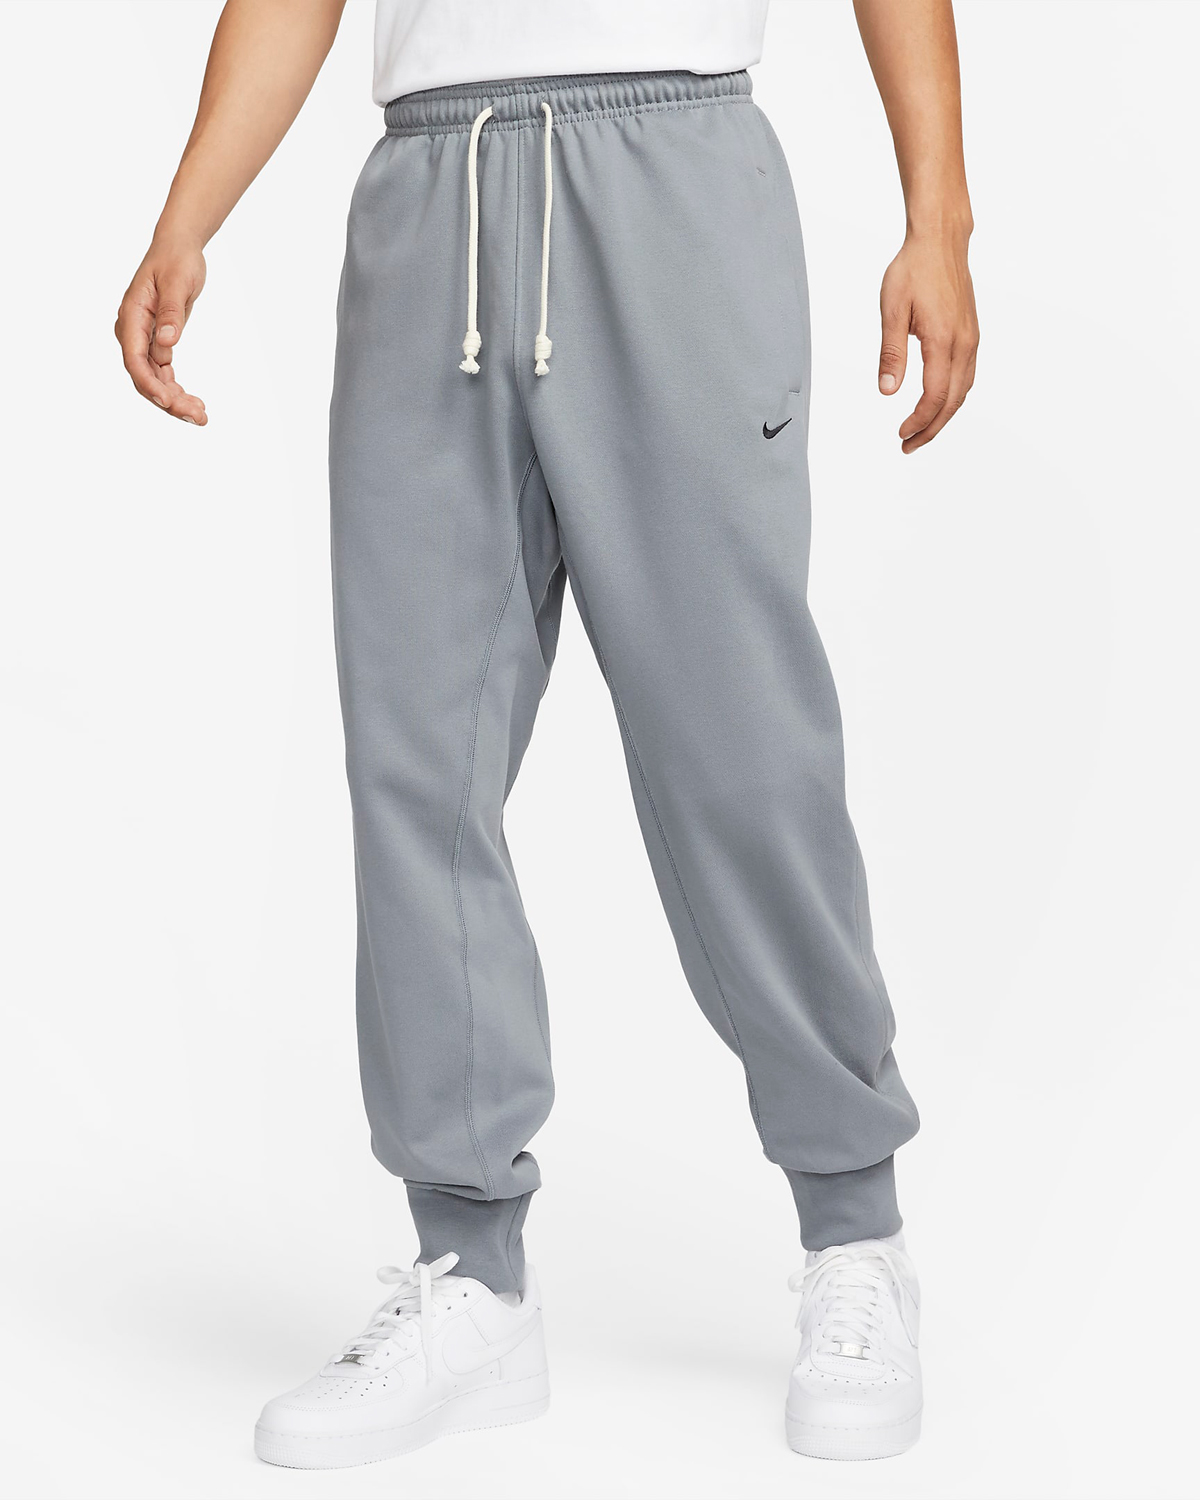 Nike-Standard-Issue-Pants-Cool-Grey